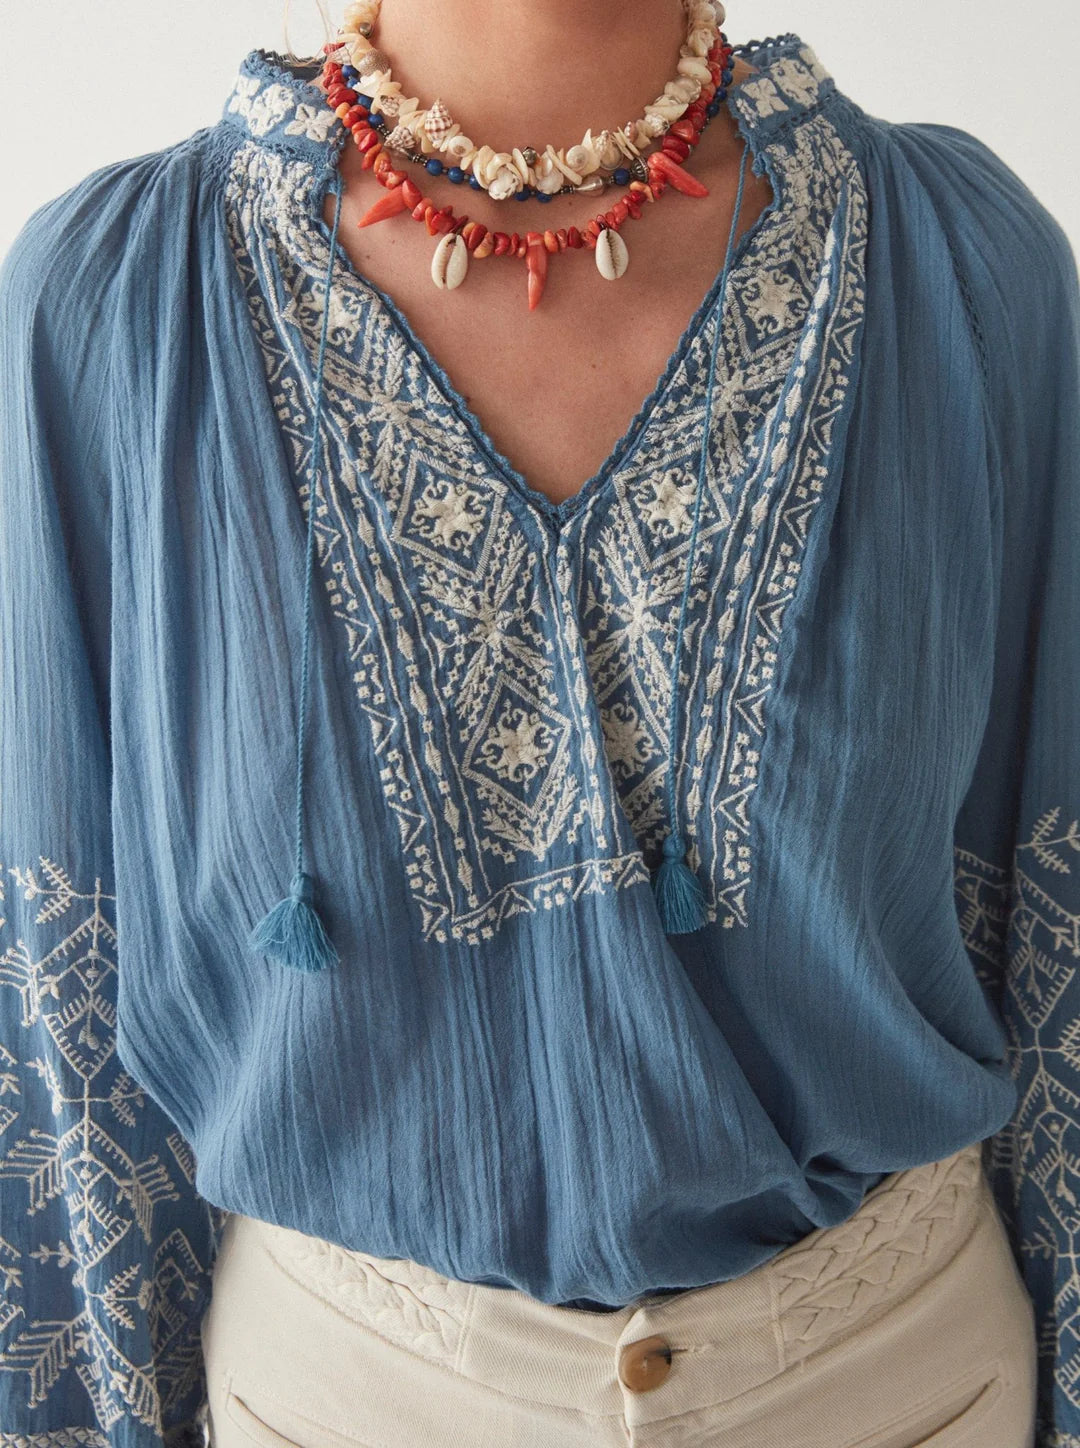 Close-up of a person wearing a Sandrine Cotton Blouse in French Blue tone with ethnic pattern embroidery and a beaded necklace by Maison Hotel.